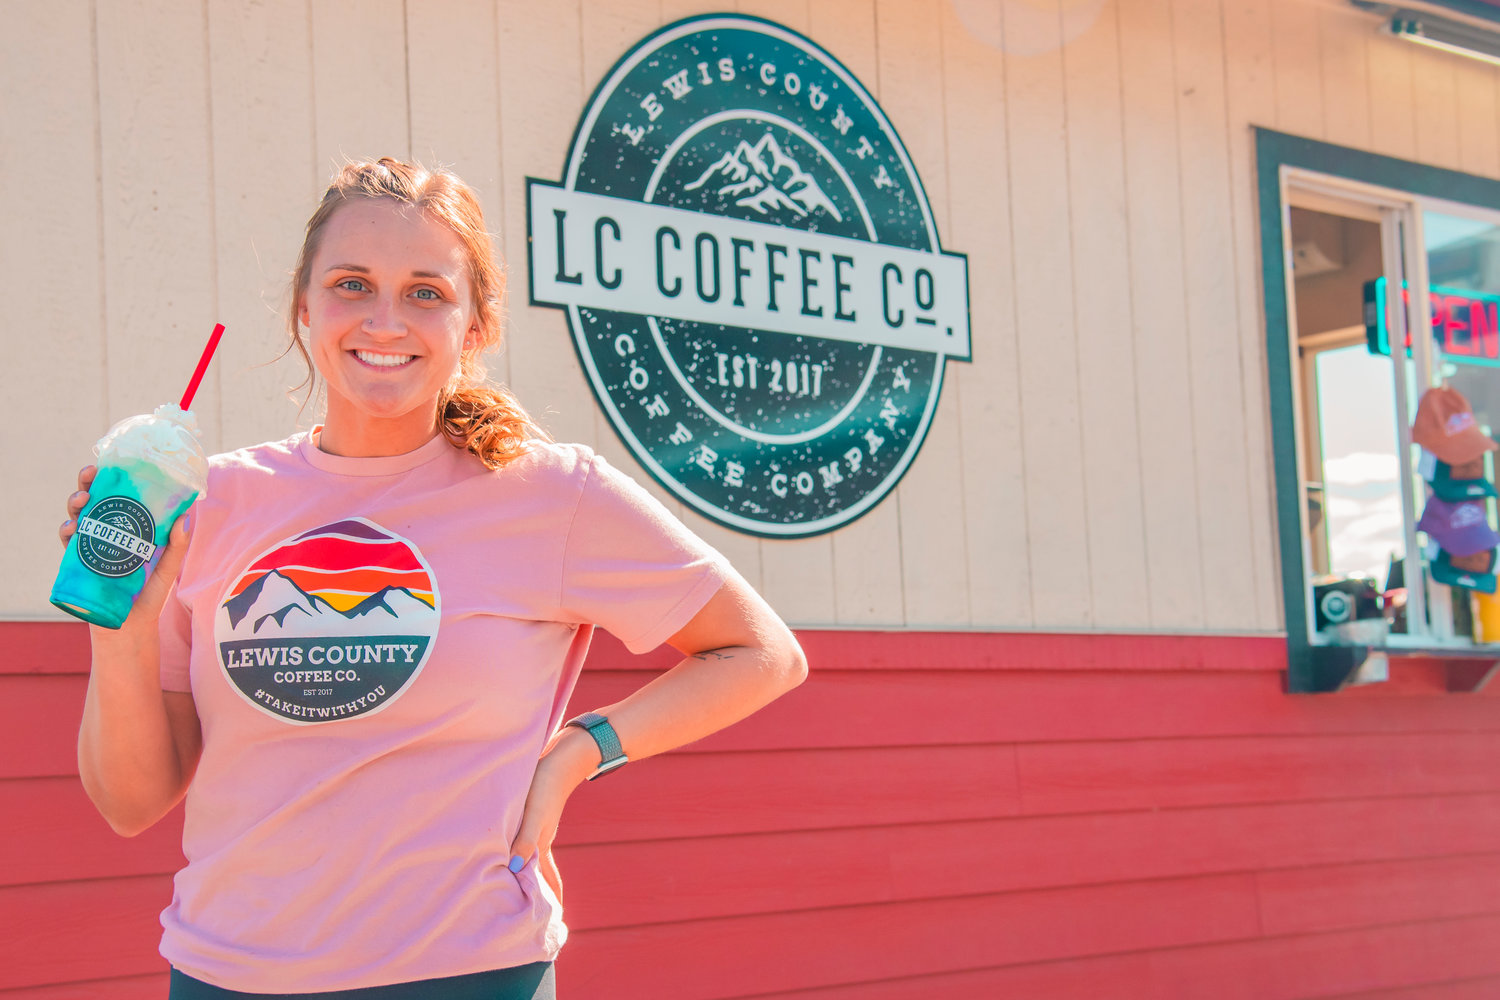 Emily Silva smiles and poses with a drink at Lewis County Coffee Co. in Chehalis on Thursday.